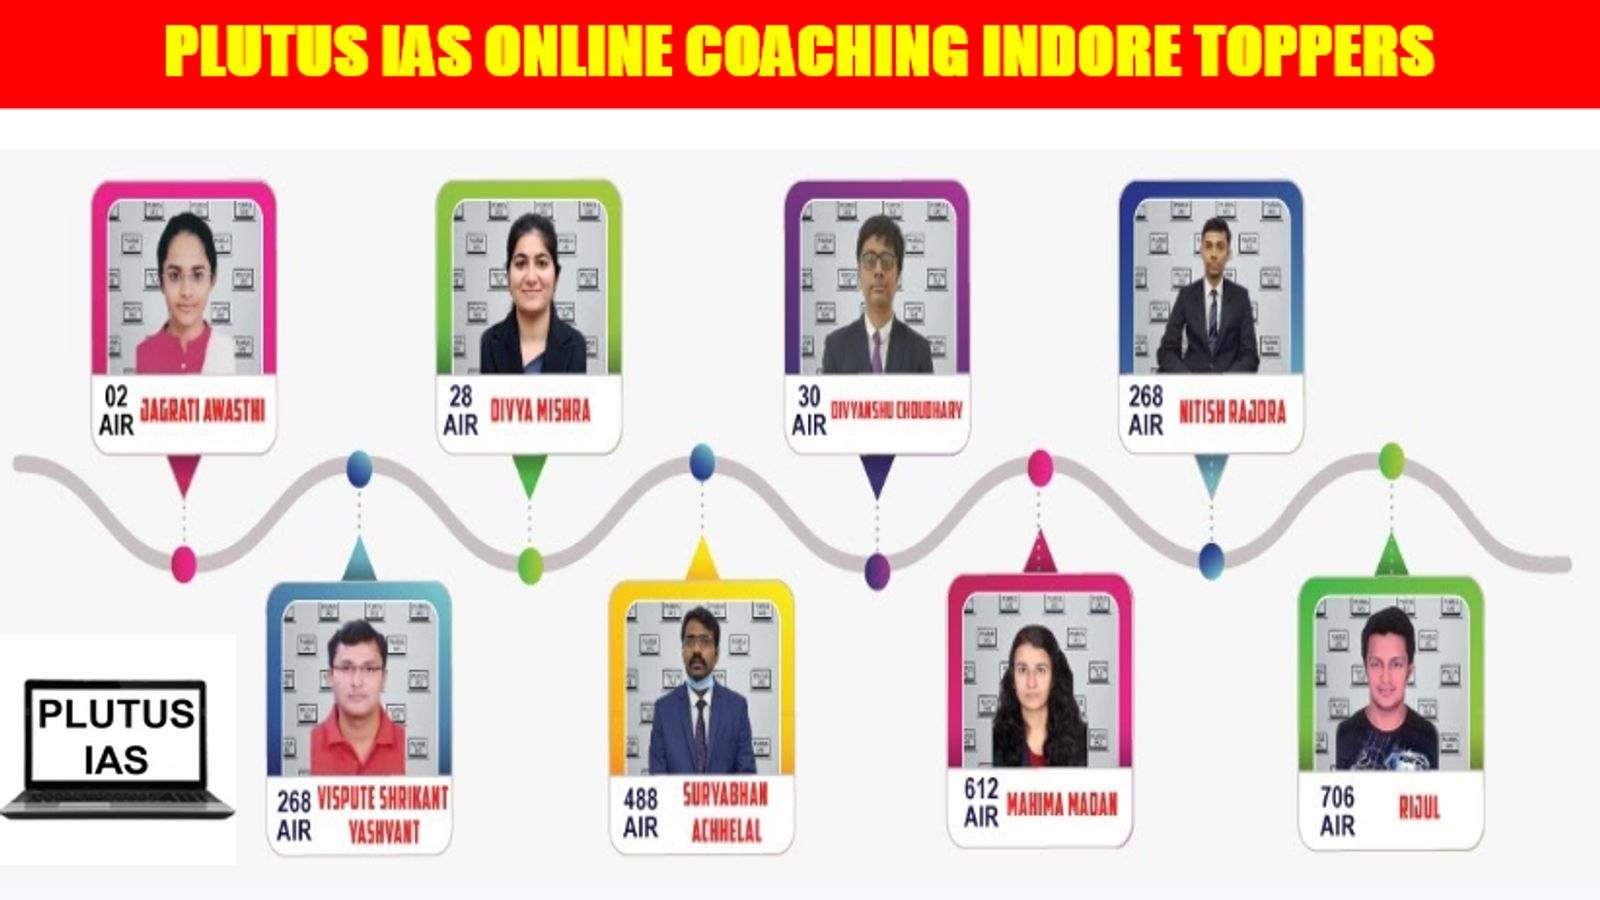 Plutus IAS Online Coaching Indore Toppers